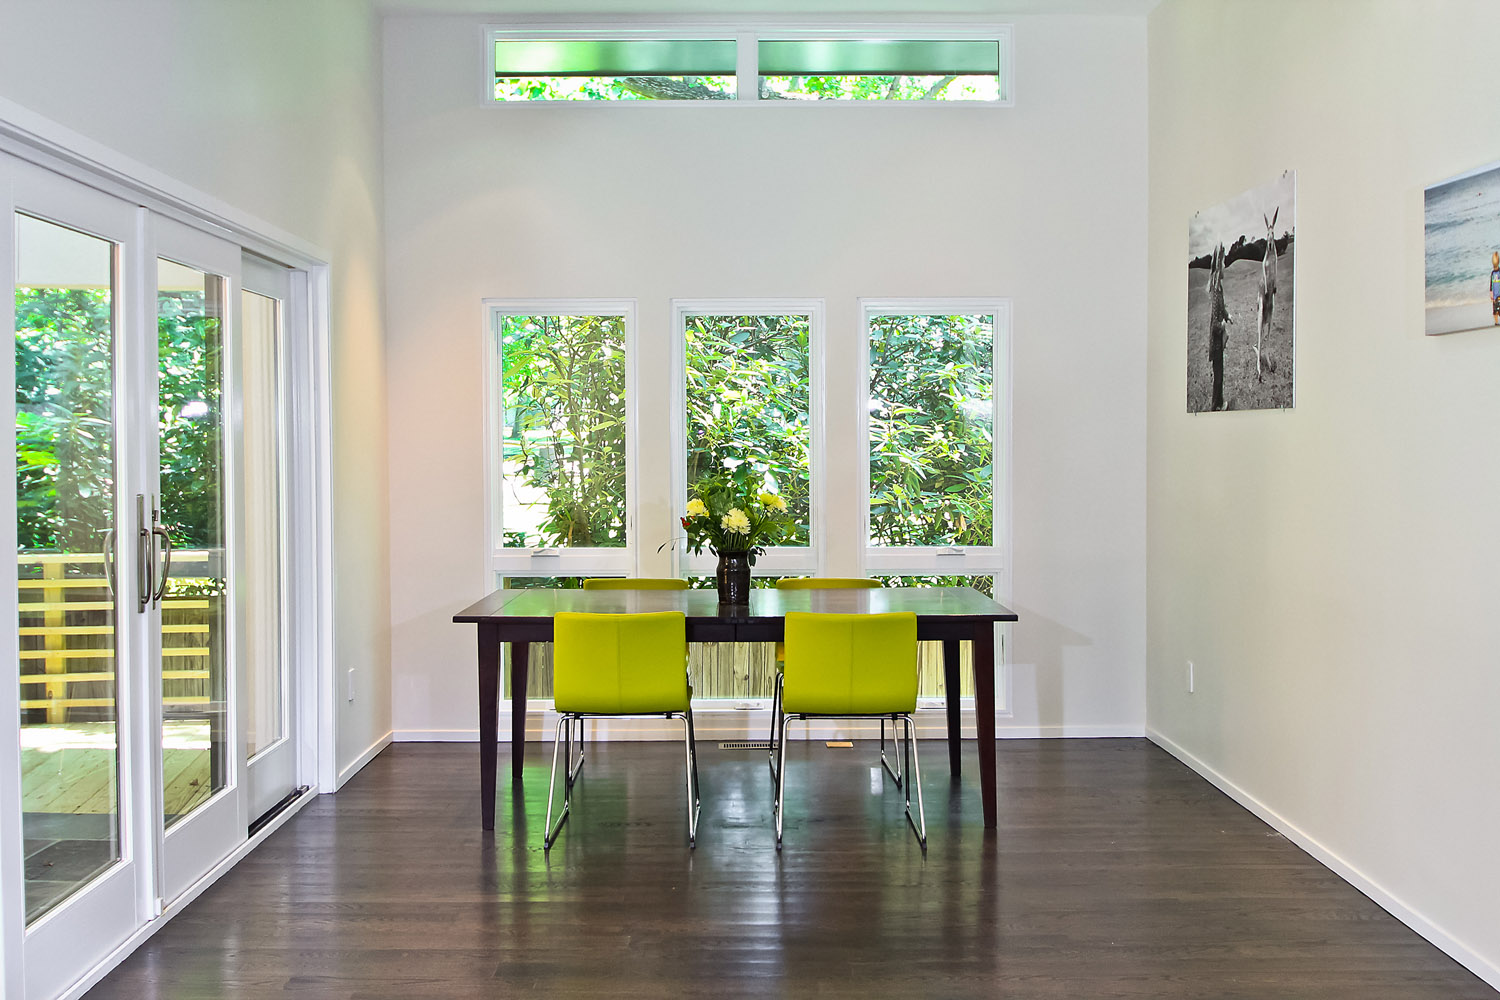 Open, airy dining room with white walls and lime green modern chairs